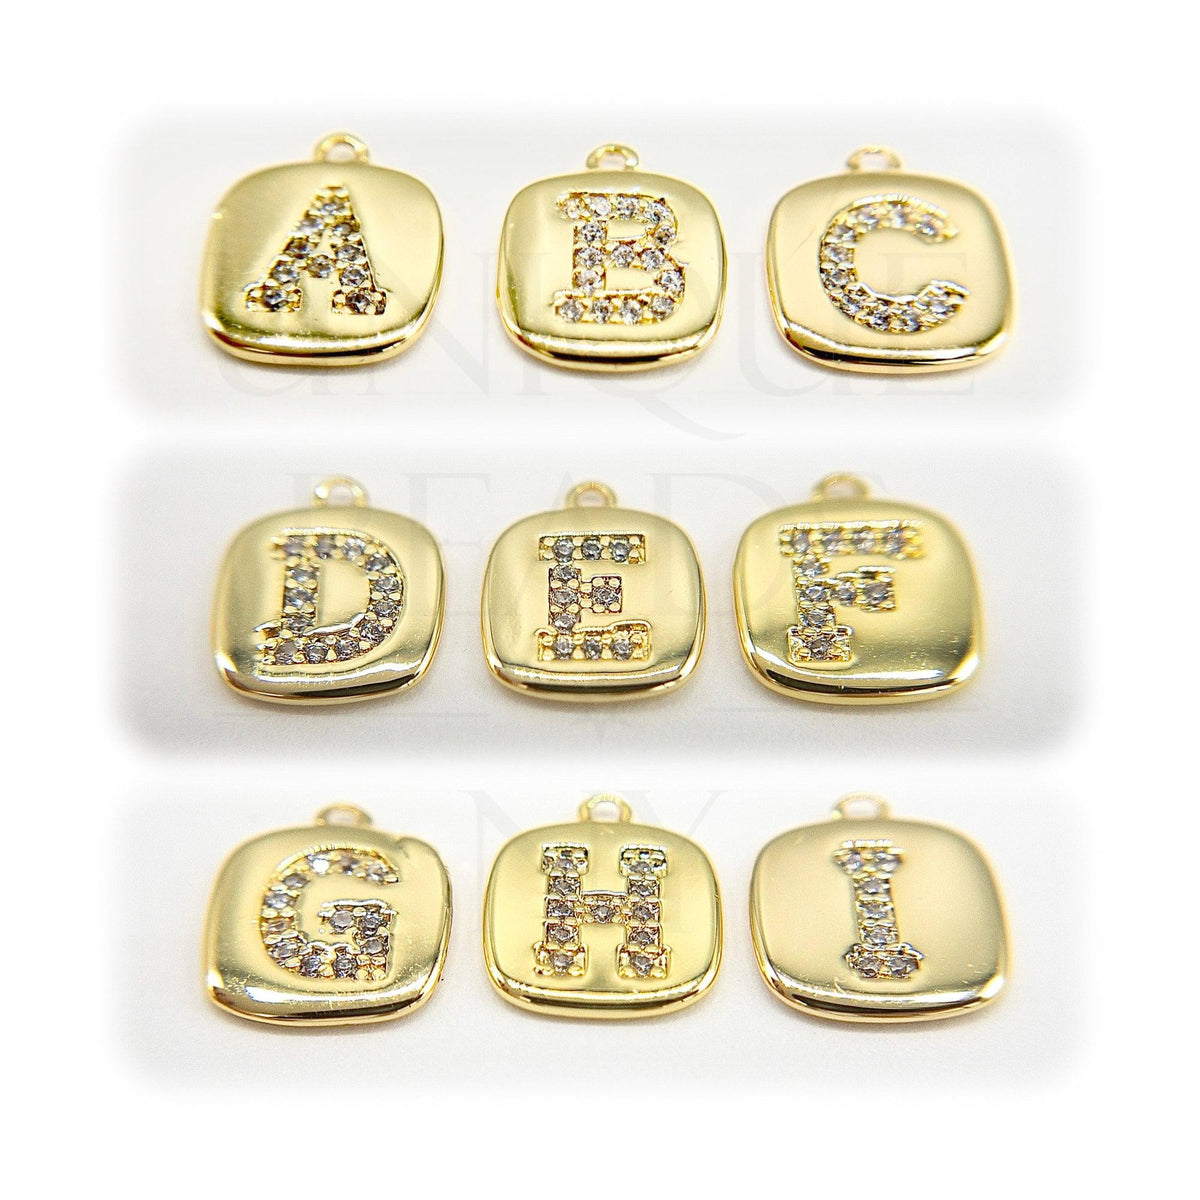 BEADNOVA Gold Plated Alphabet Charms Beads Set for Jewelry Making (100pcs)